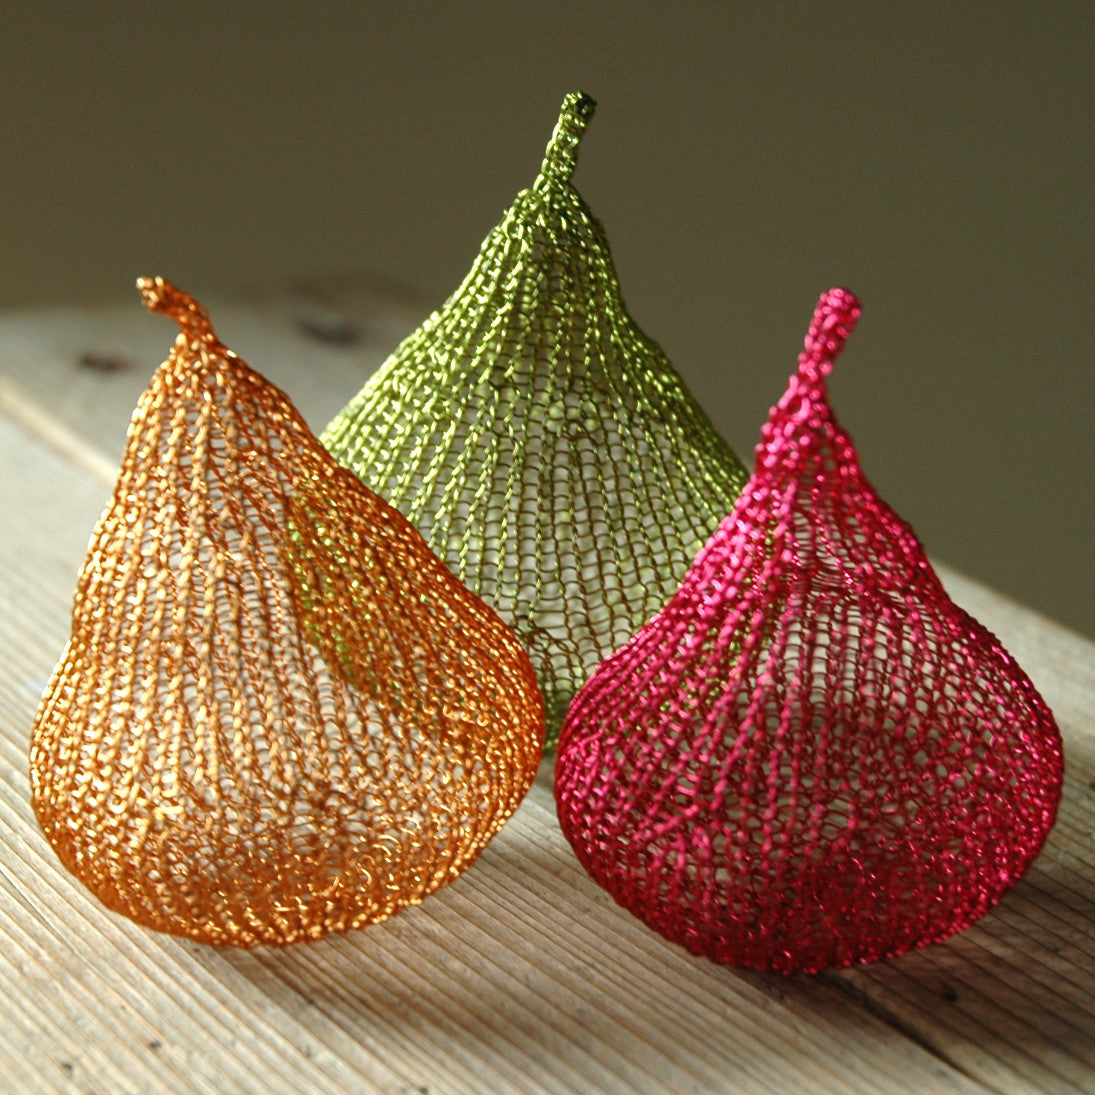 Home Deco Pears, Handmade Wire Crochet Home Accents - Yooladesign